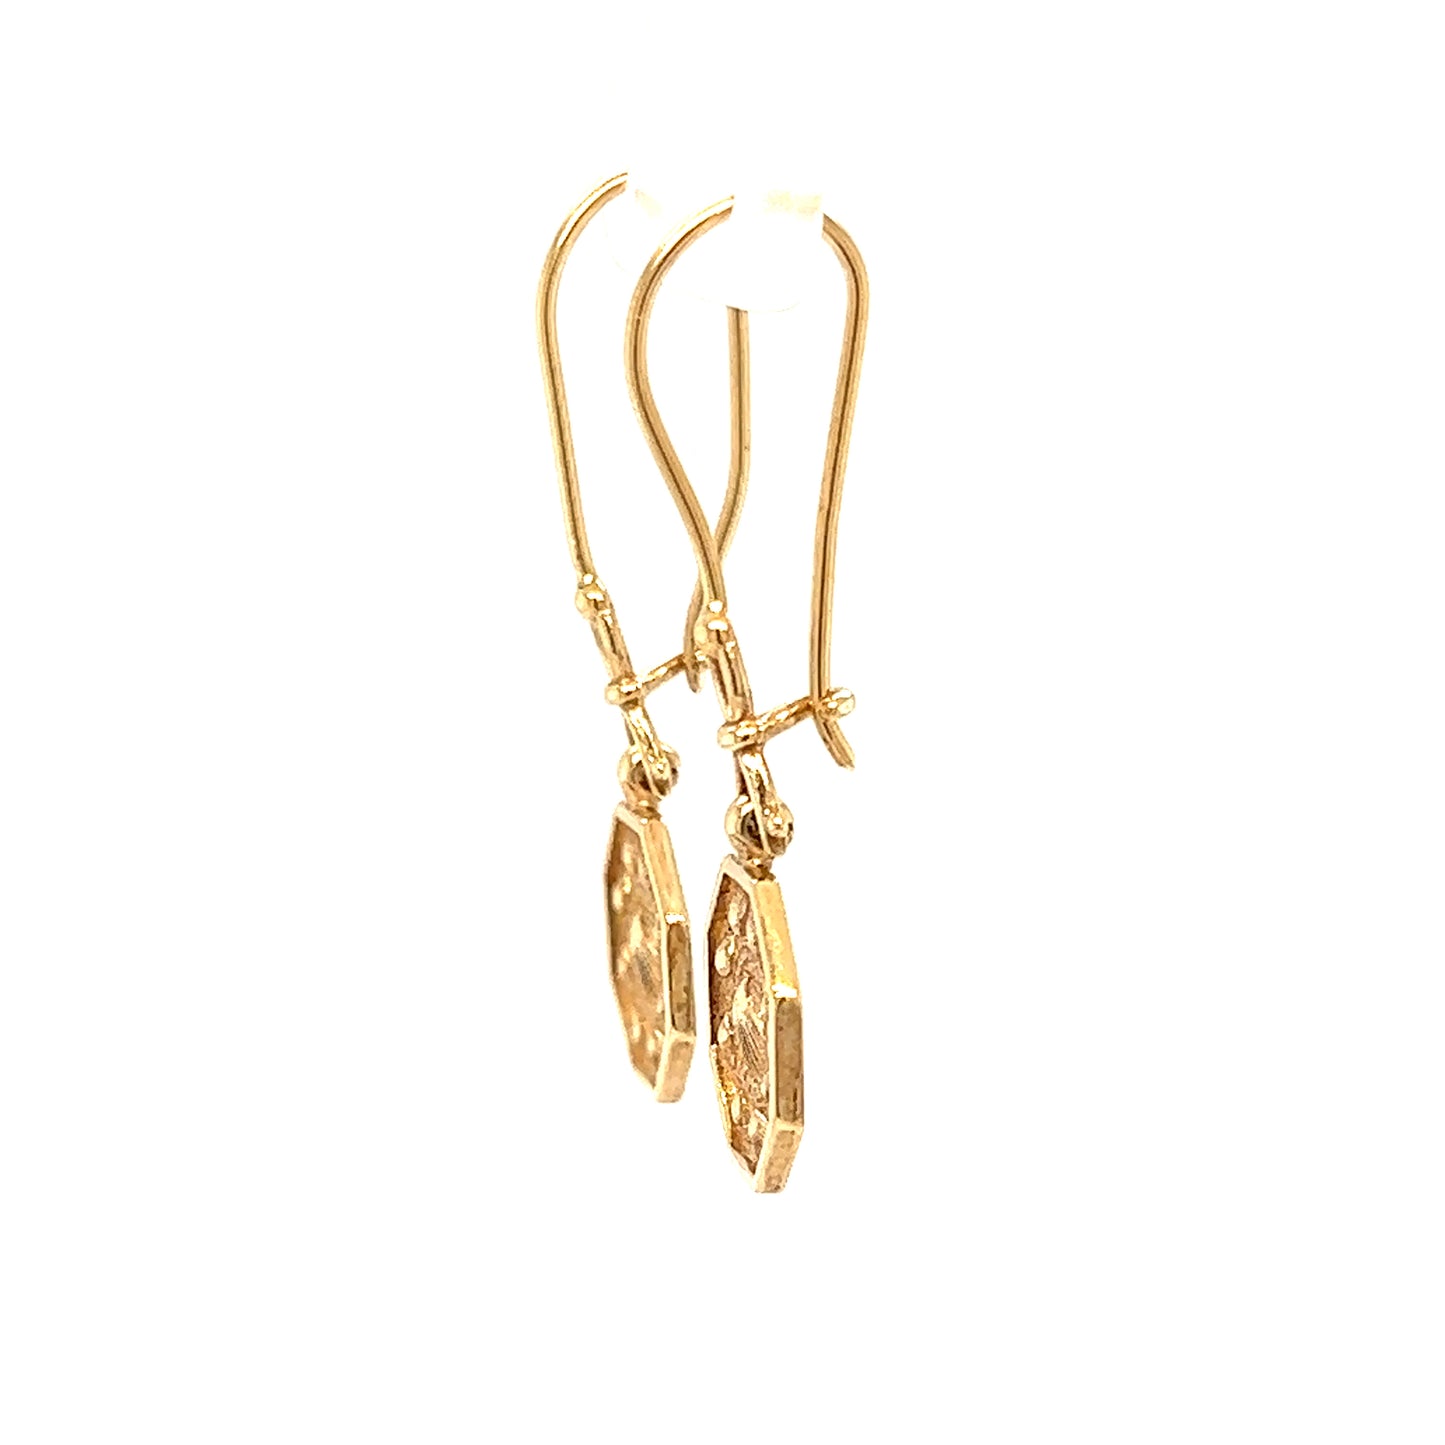 Sailor's Valentine Dangle Earrings in 14K Yellow Gold Hanging Side View